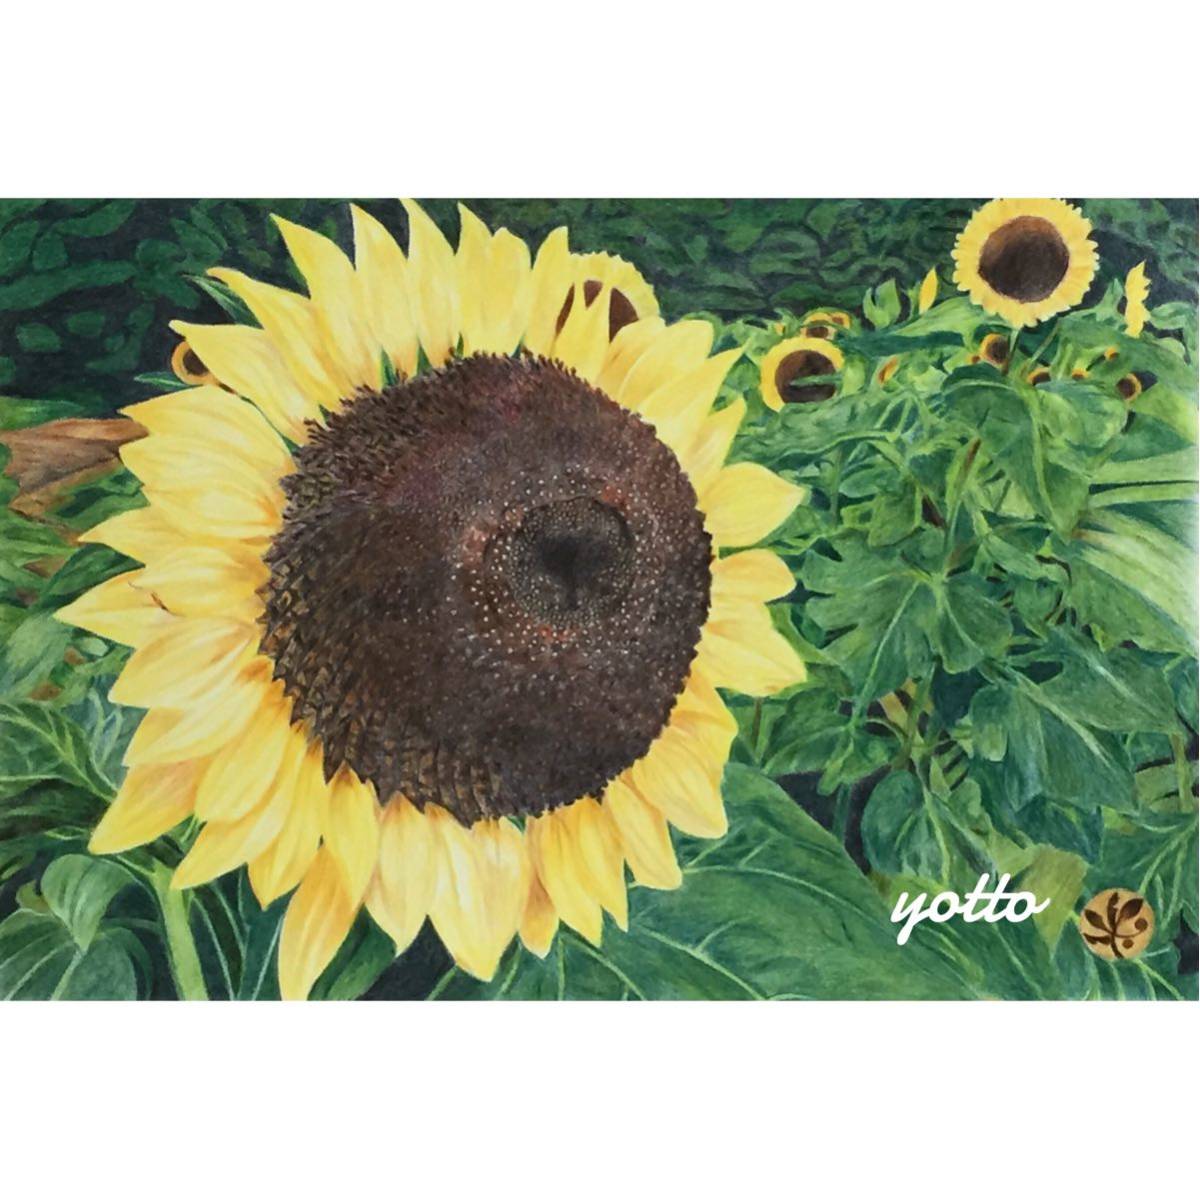 Colored pencil drawing gift A4 with frame ◆Hand-drawn ◇Original drawing ◆Sunflower◇◆Yotto◇, artwork, painting, pencil drawing, charcoal drawing